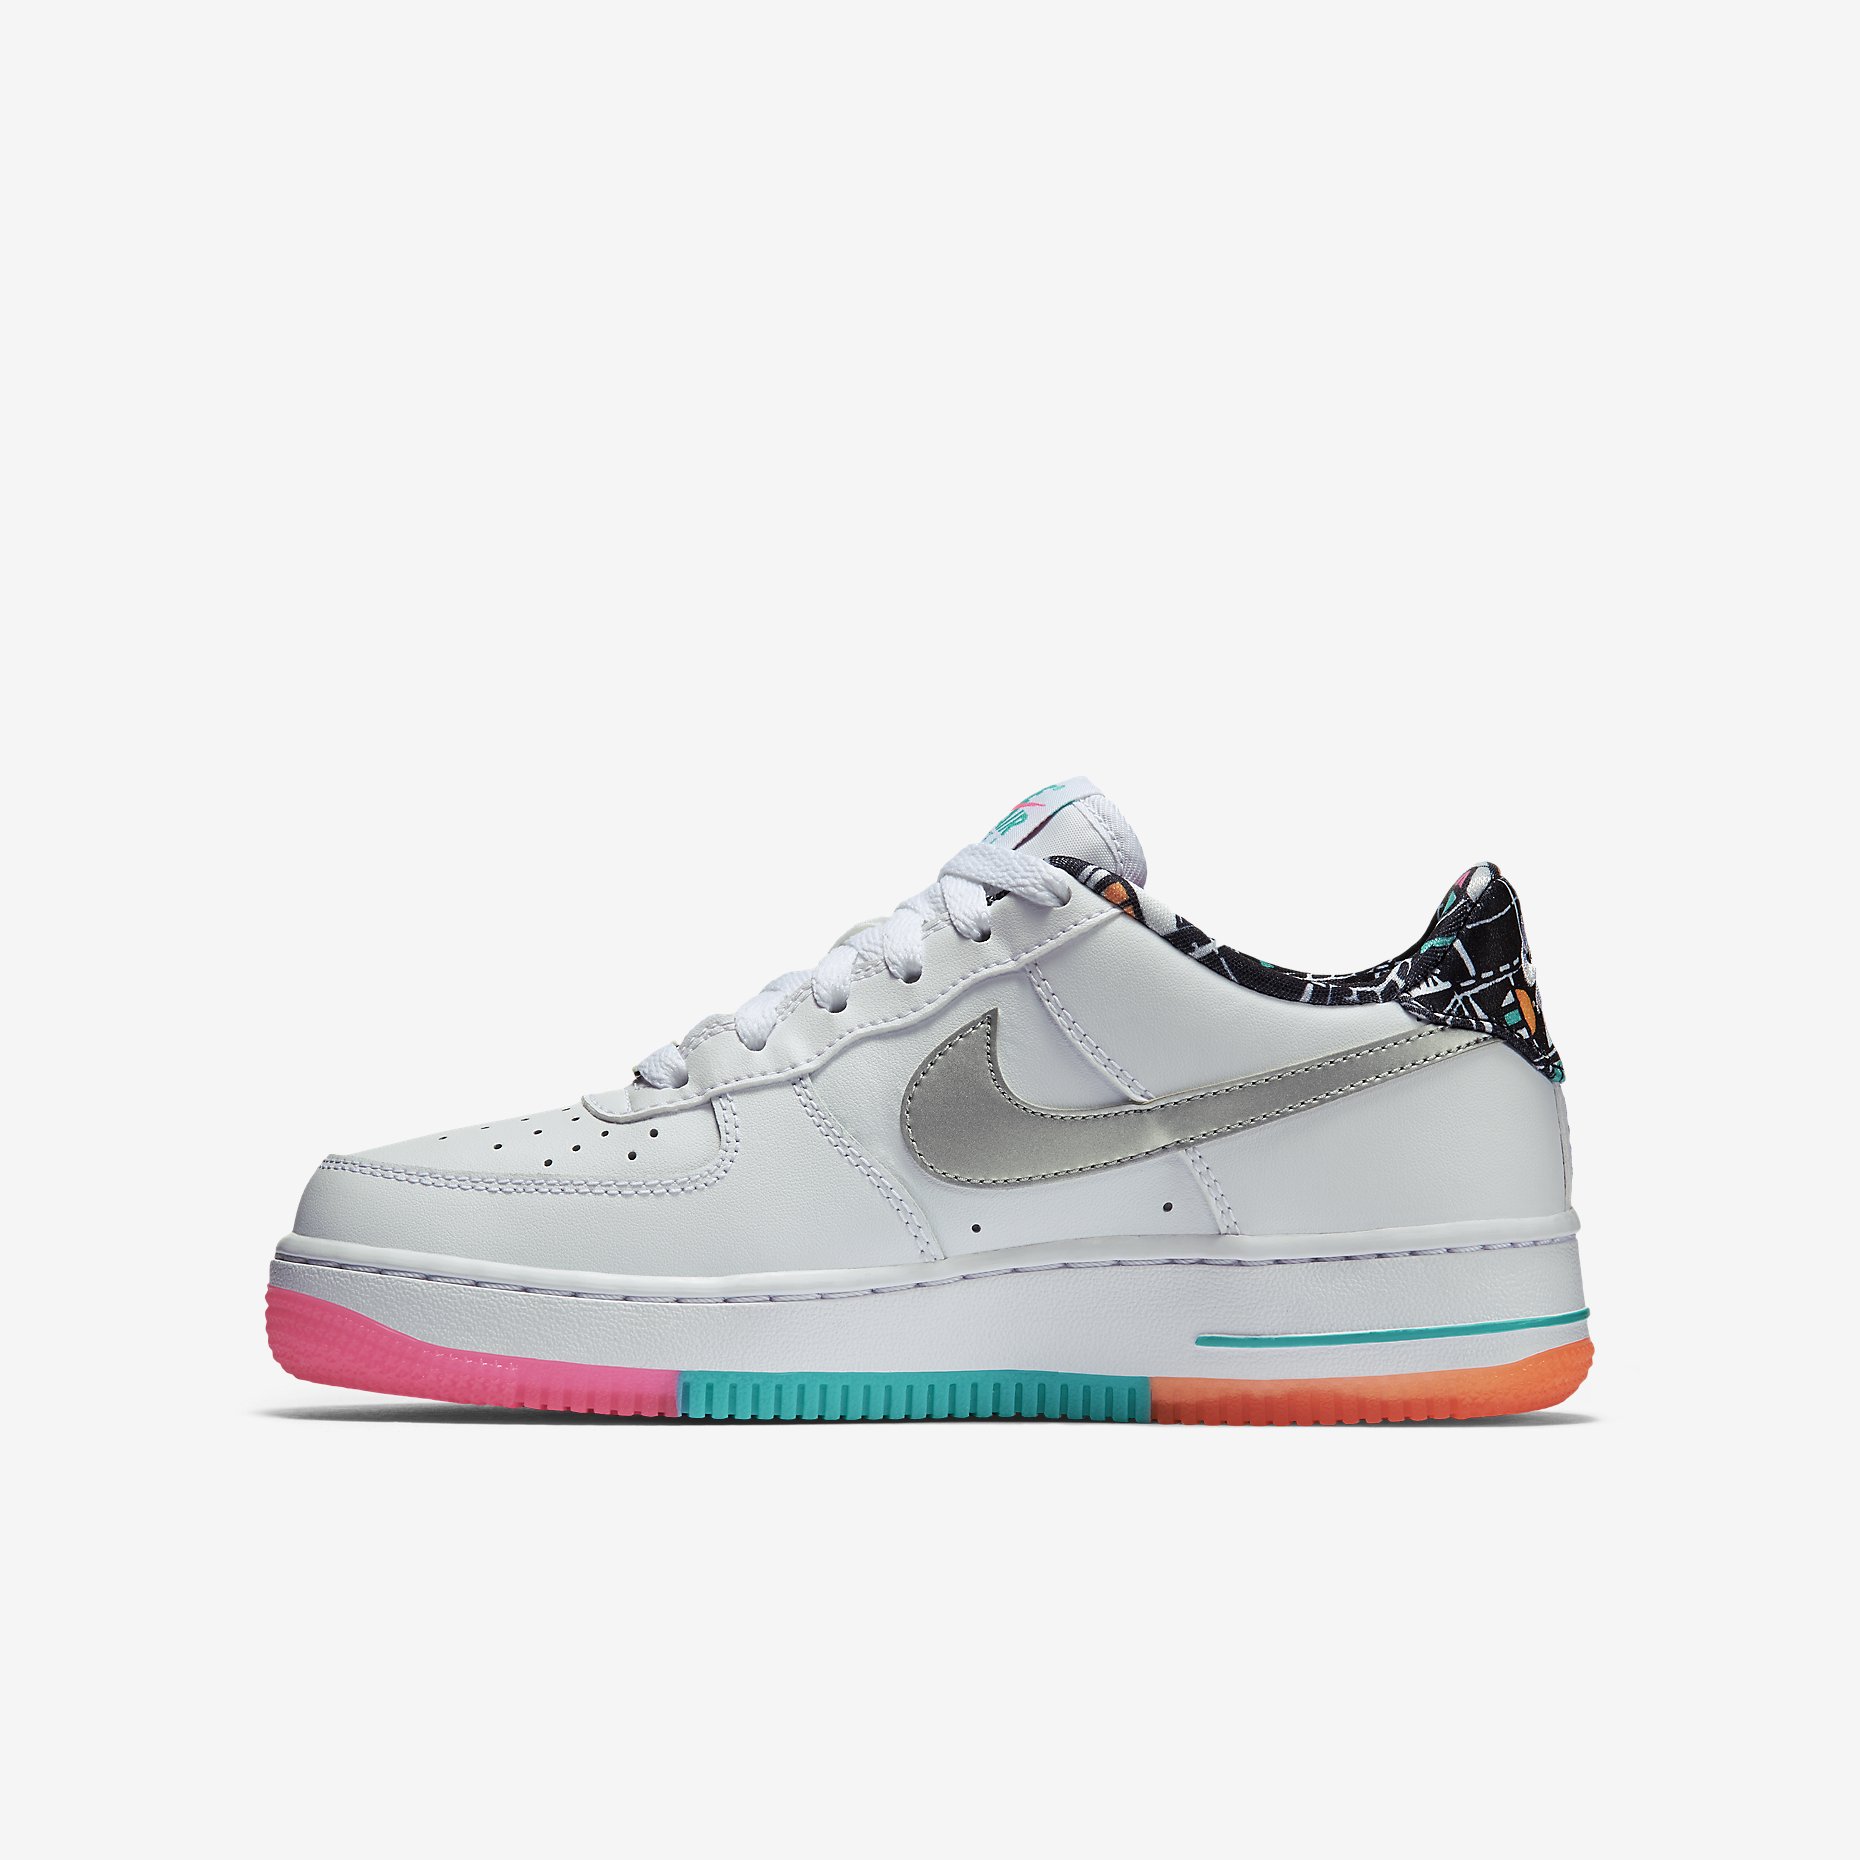 air force 1 size 5.5 white